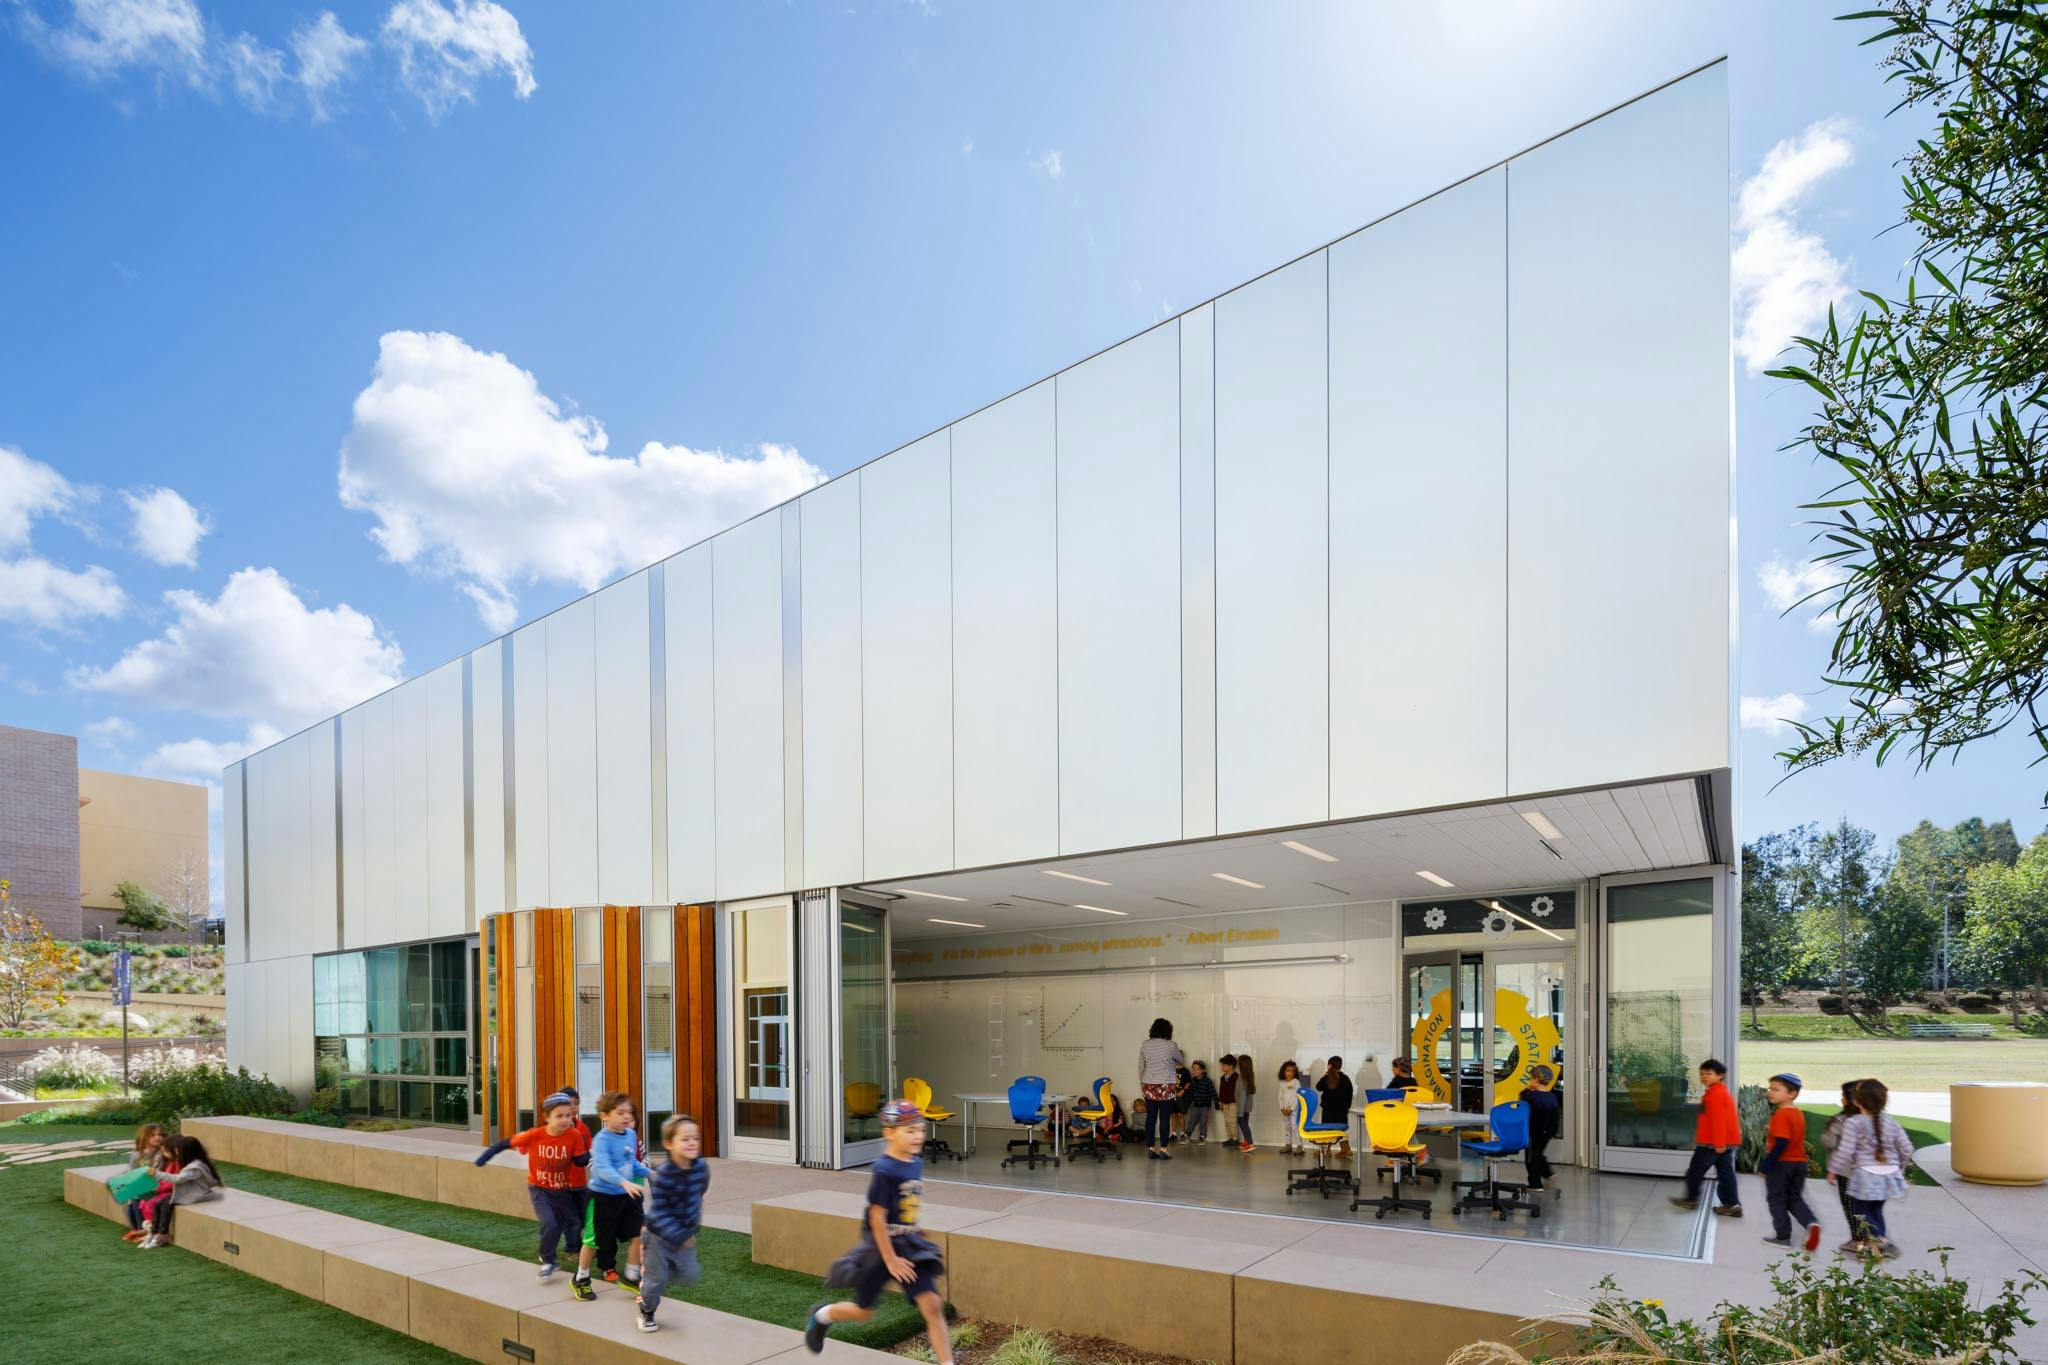 Tarbut V’Torah in Irvine, CA, with sliding glass walls created indoor/outdoor learning environment in the science building